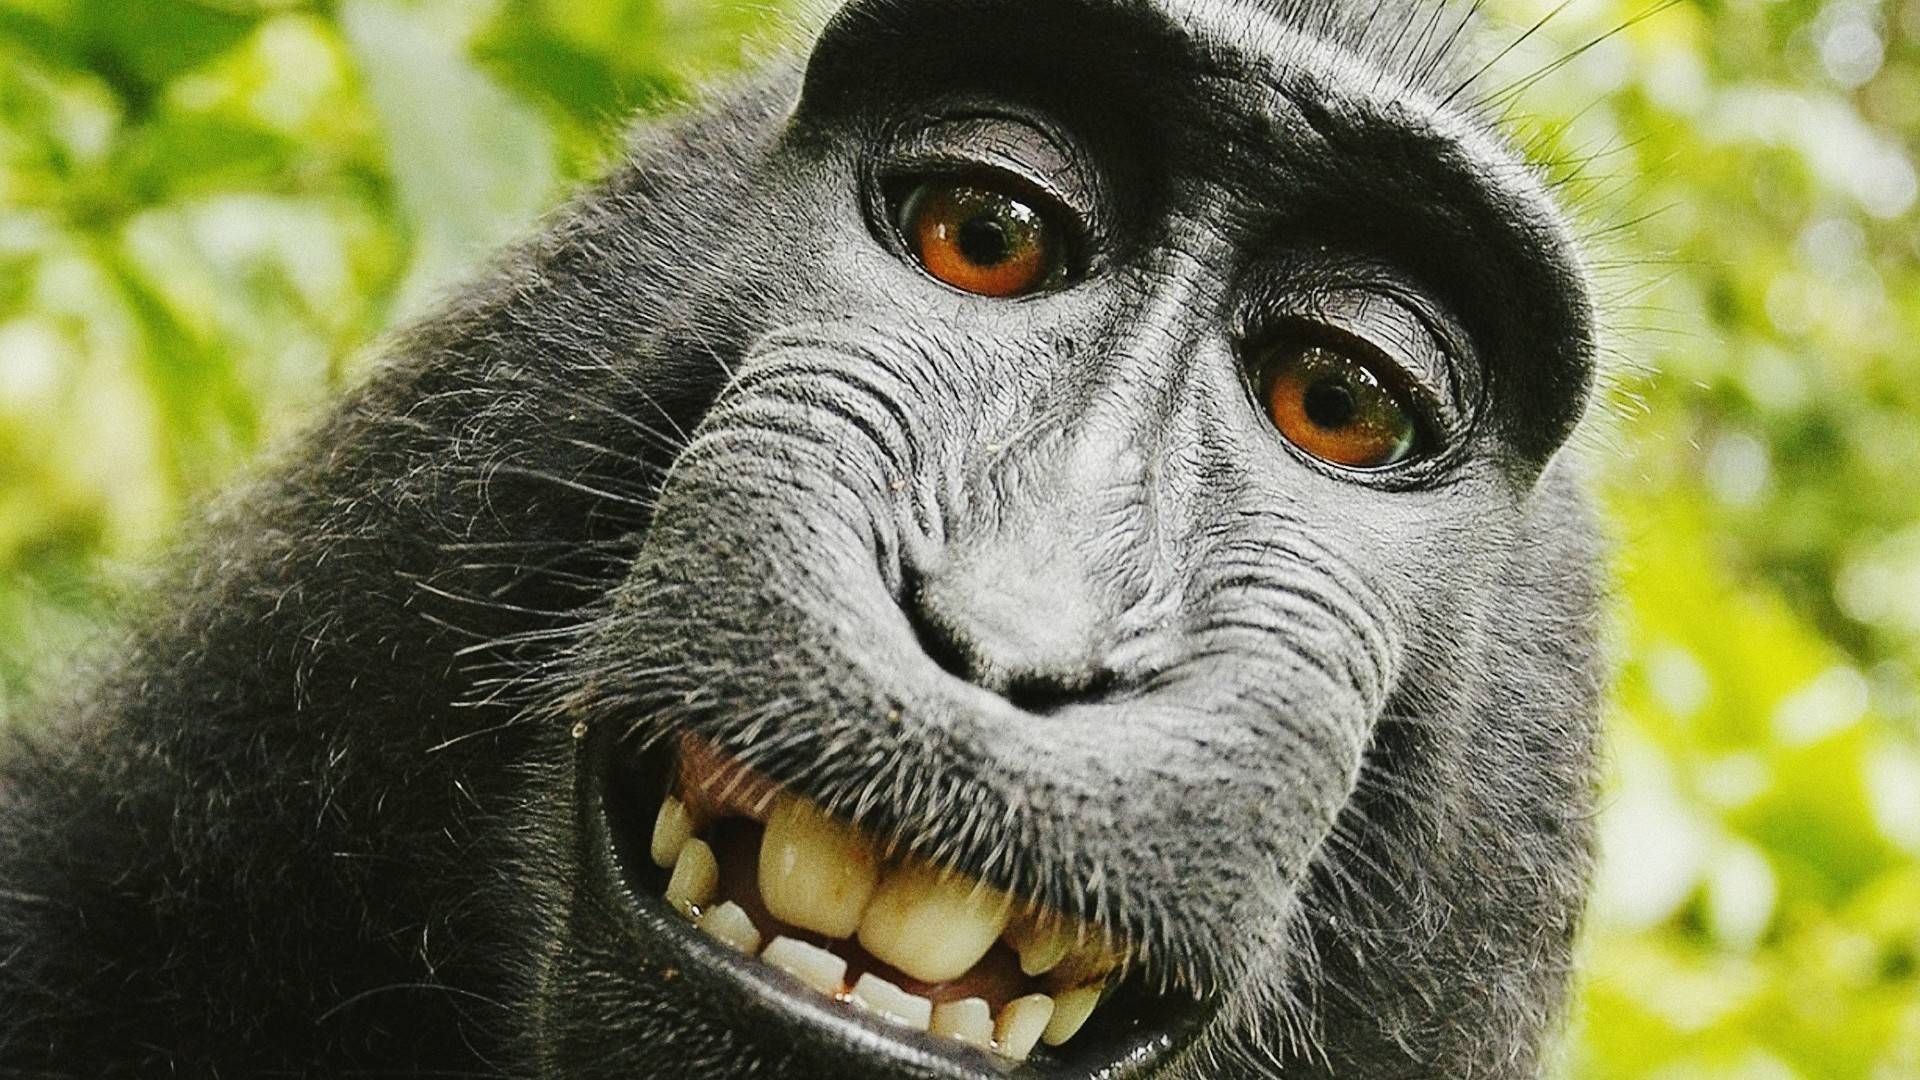 Monkeys Are Putting On A Funny Look Background, Monkey Meme Pictures  Background Image And Wallpaper for Free Download